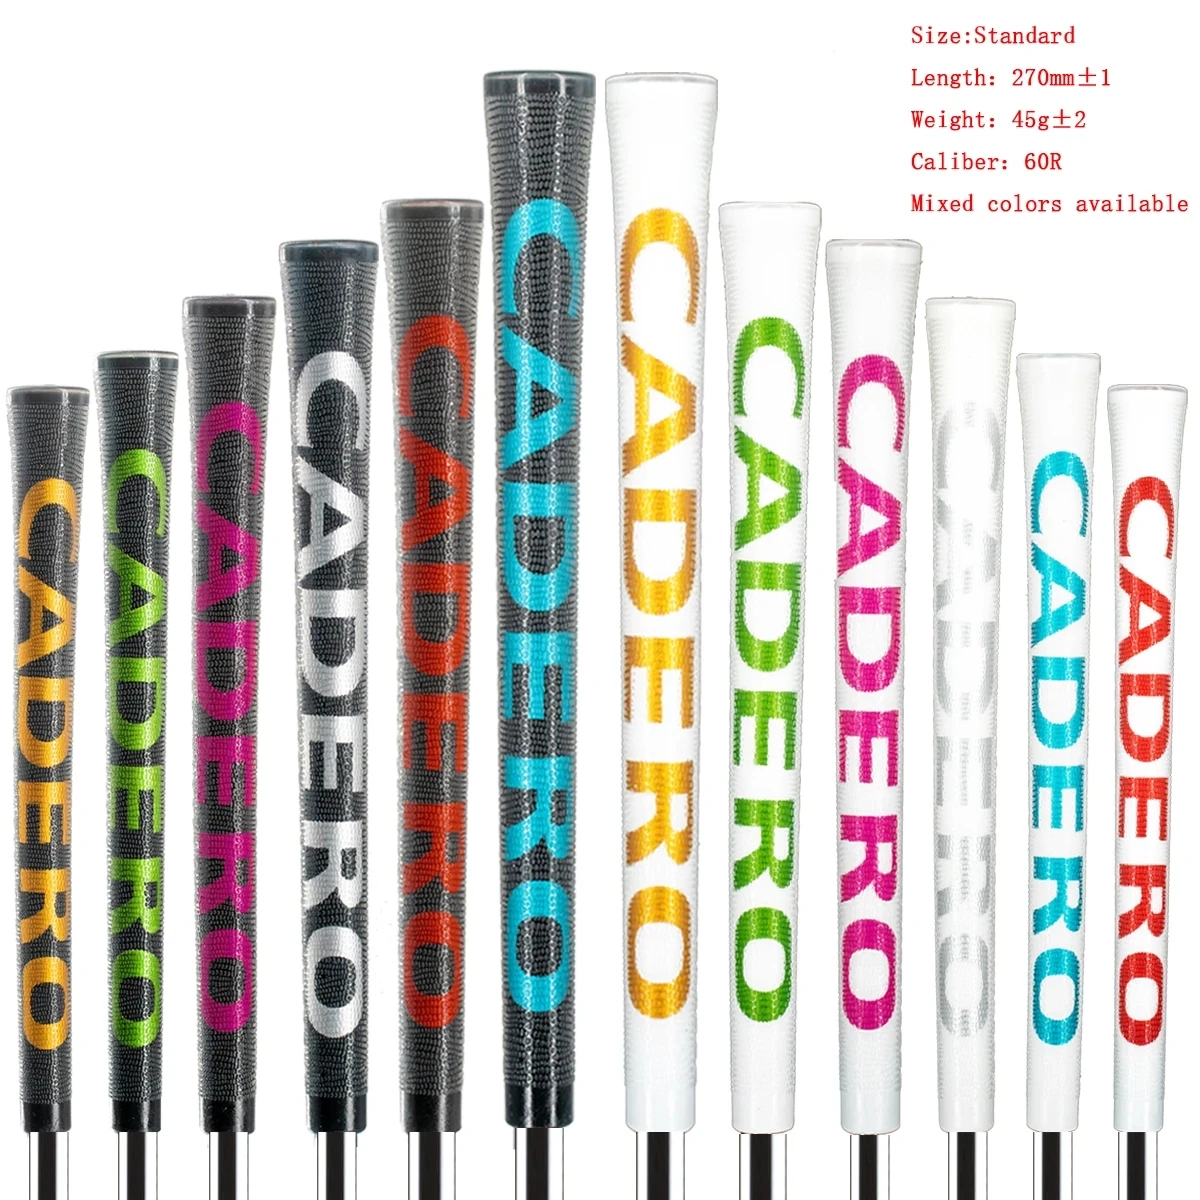 

13pcs/set Golf grips CADERO 2X2 AIR NER Crystal Standard Golf Club Grips 12 Color Mix Color Available